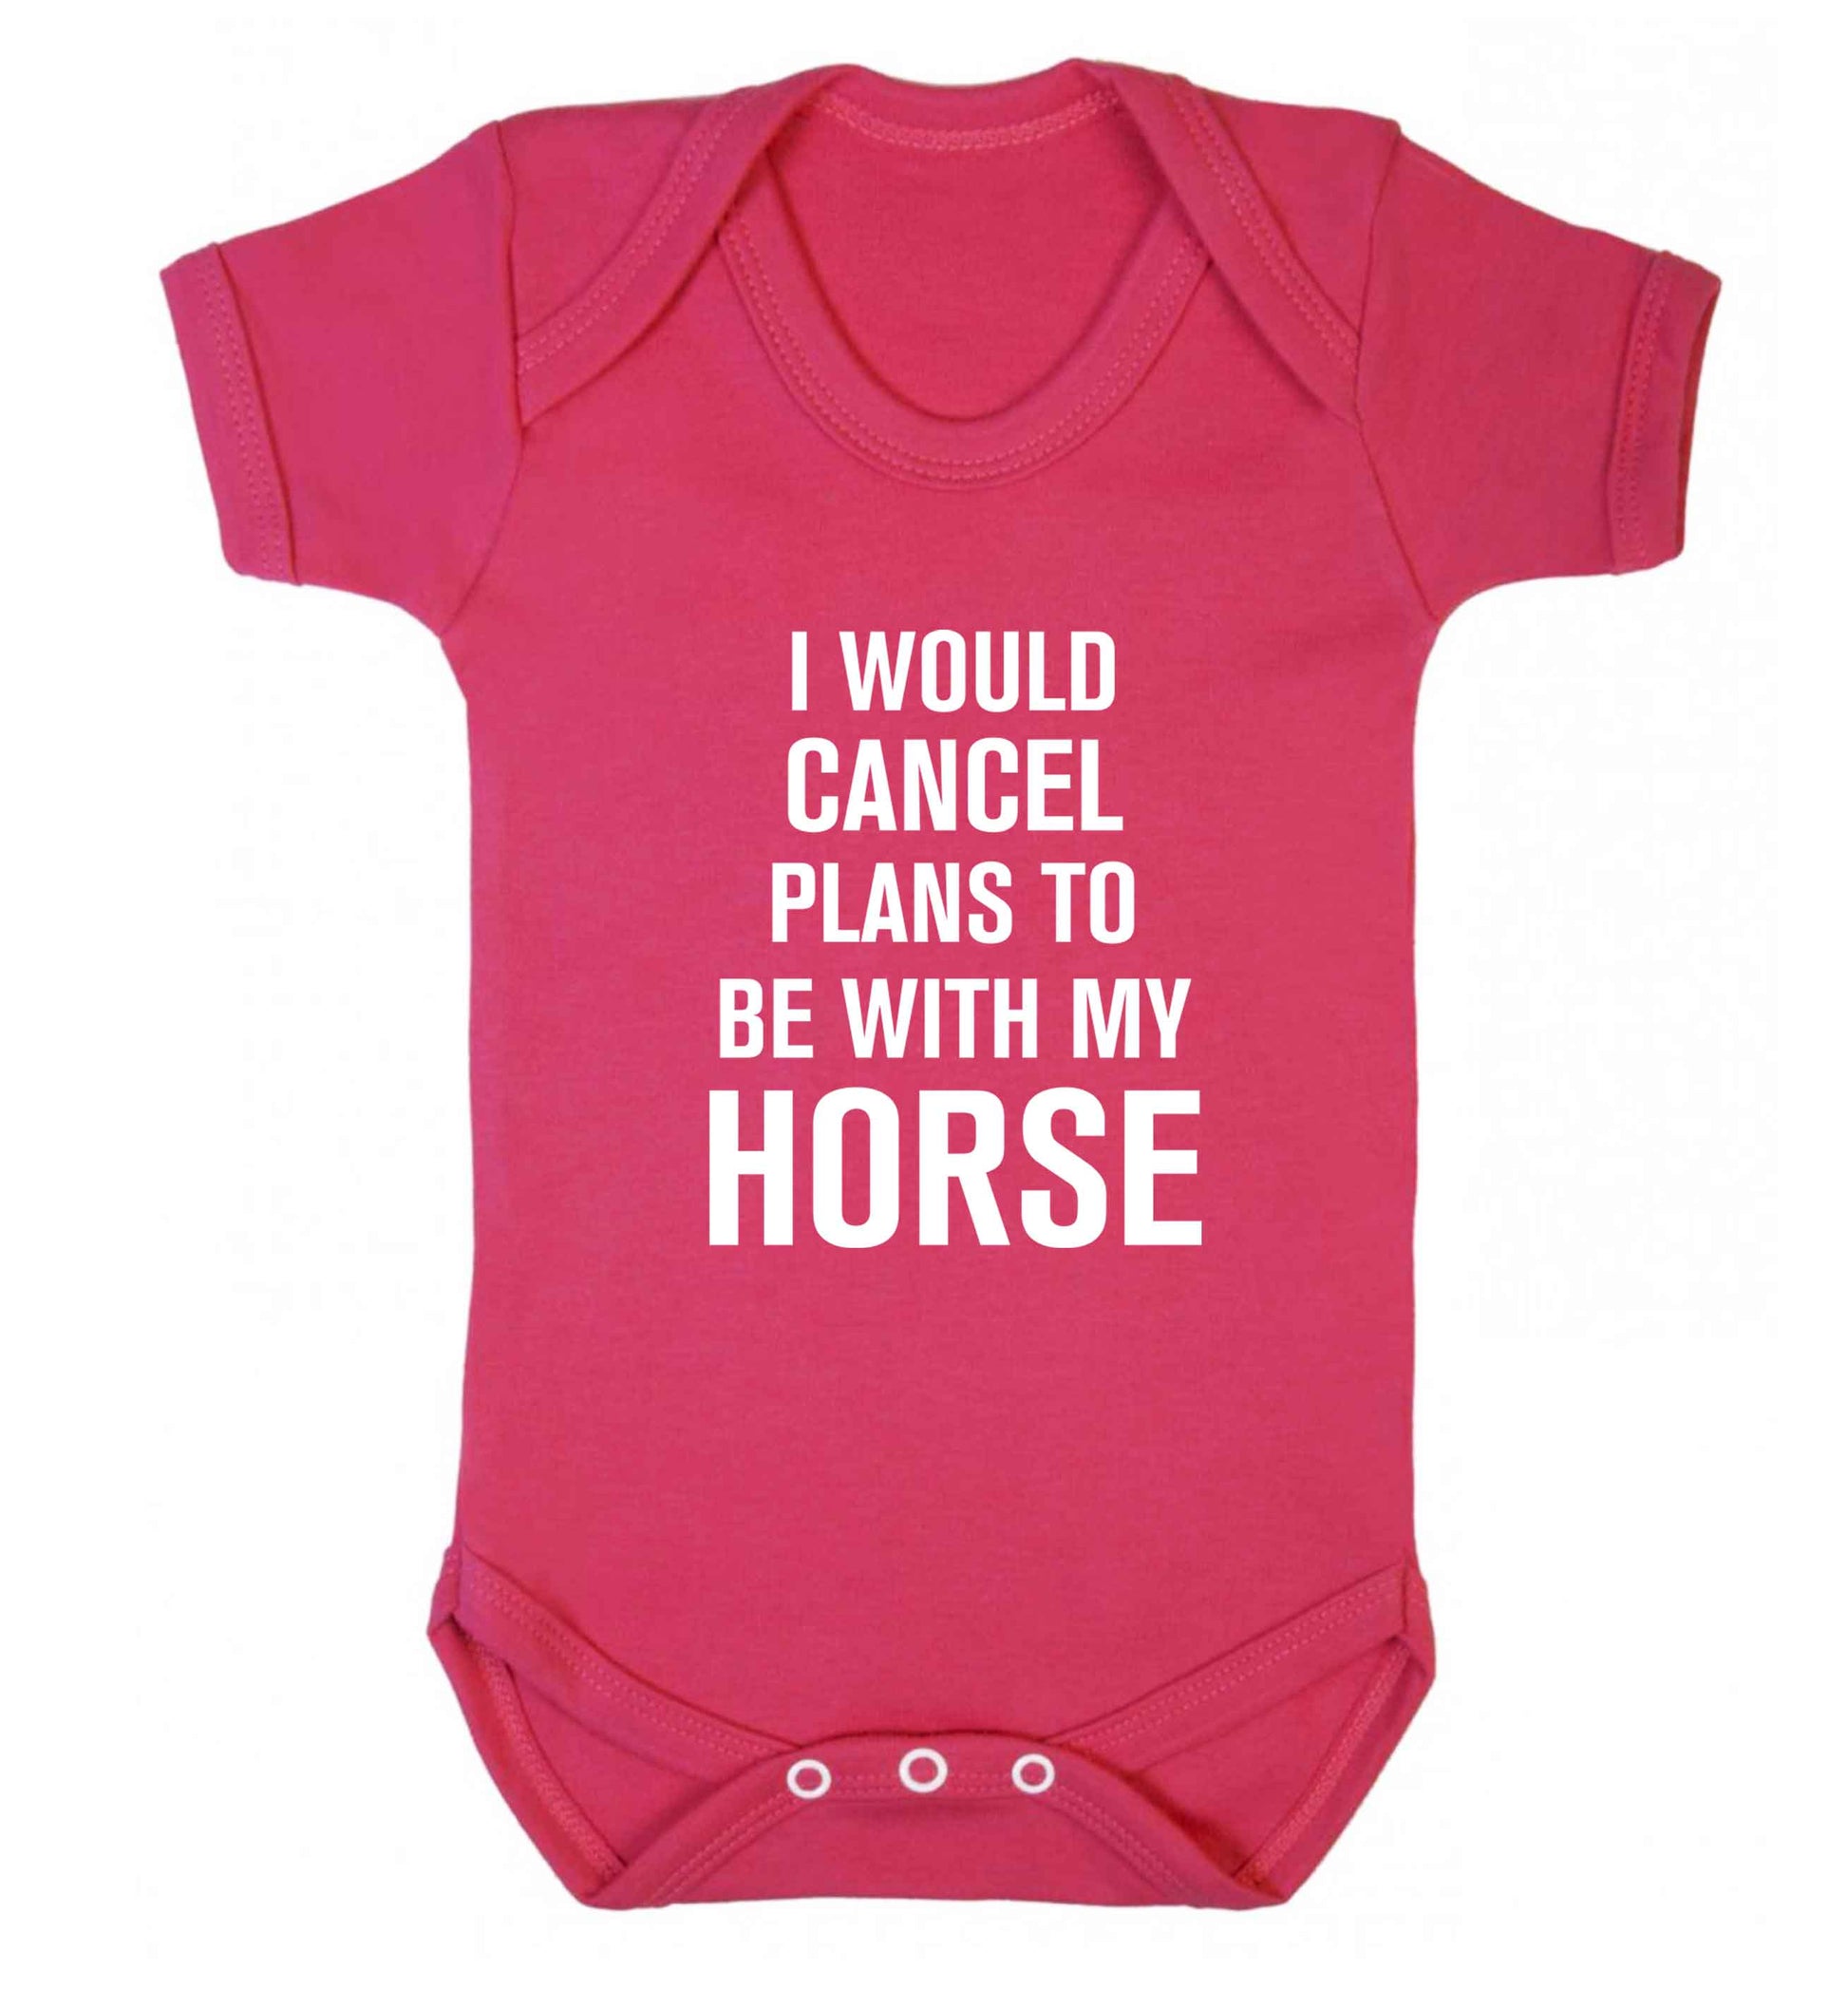 I will cancel plans to be with my horse baby vest dark pink 18-24 months